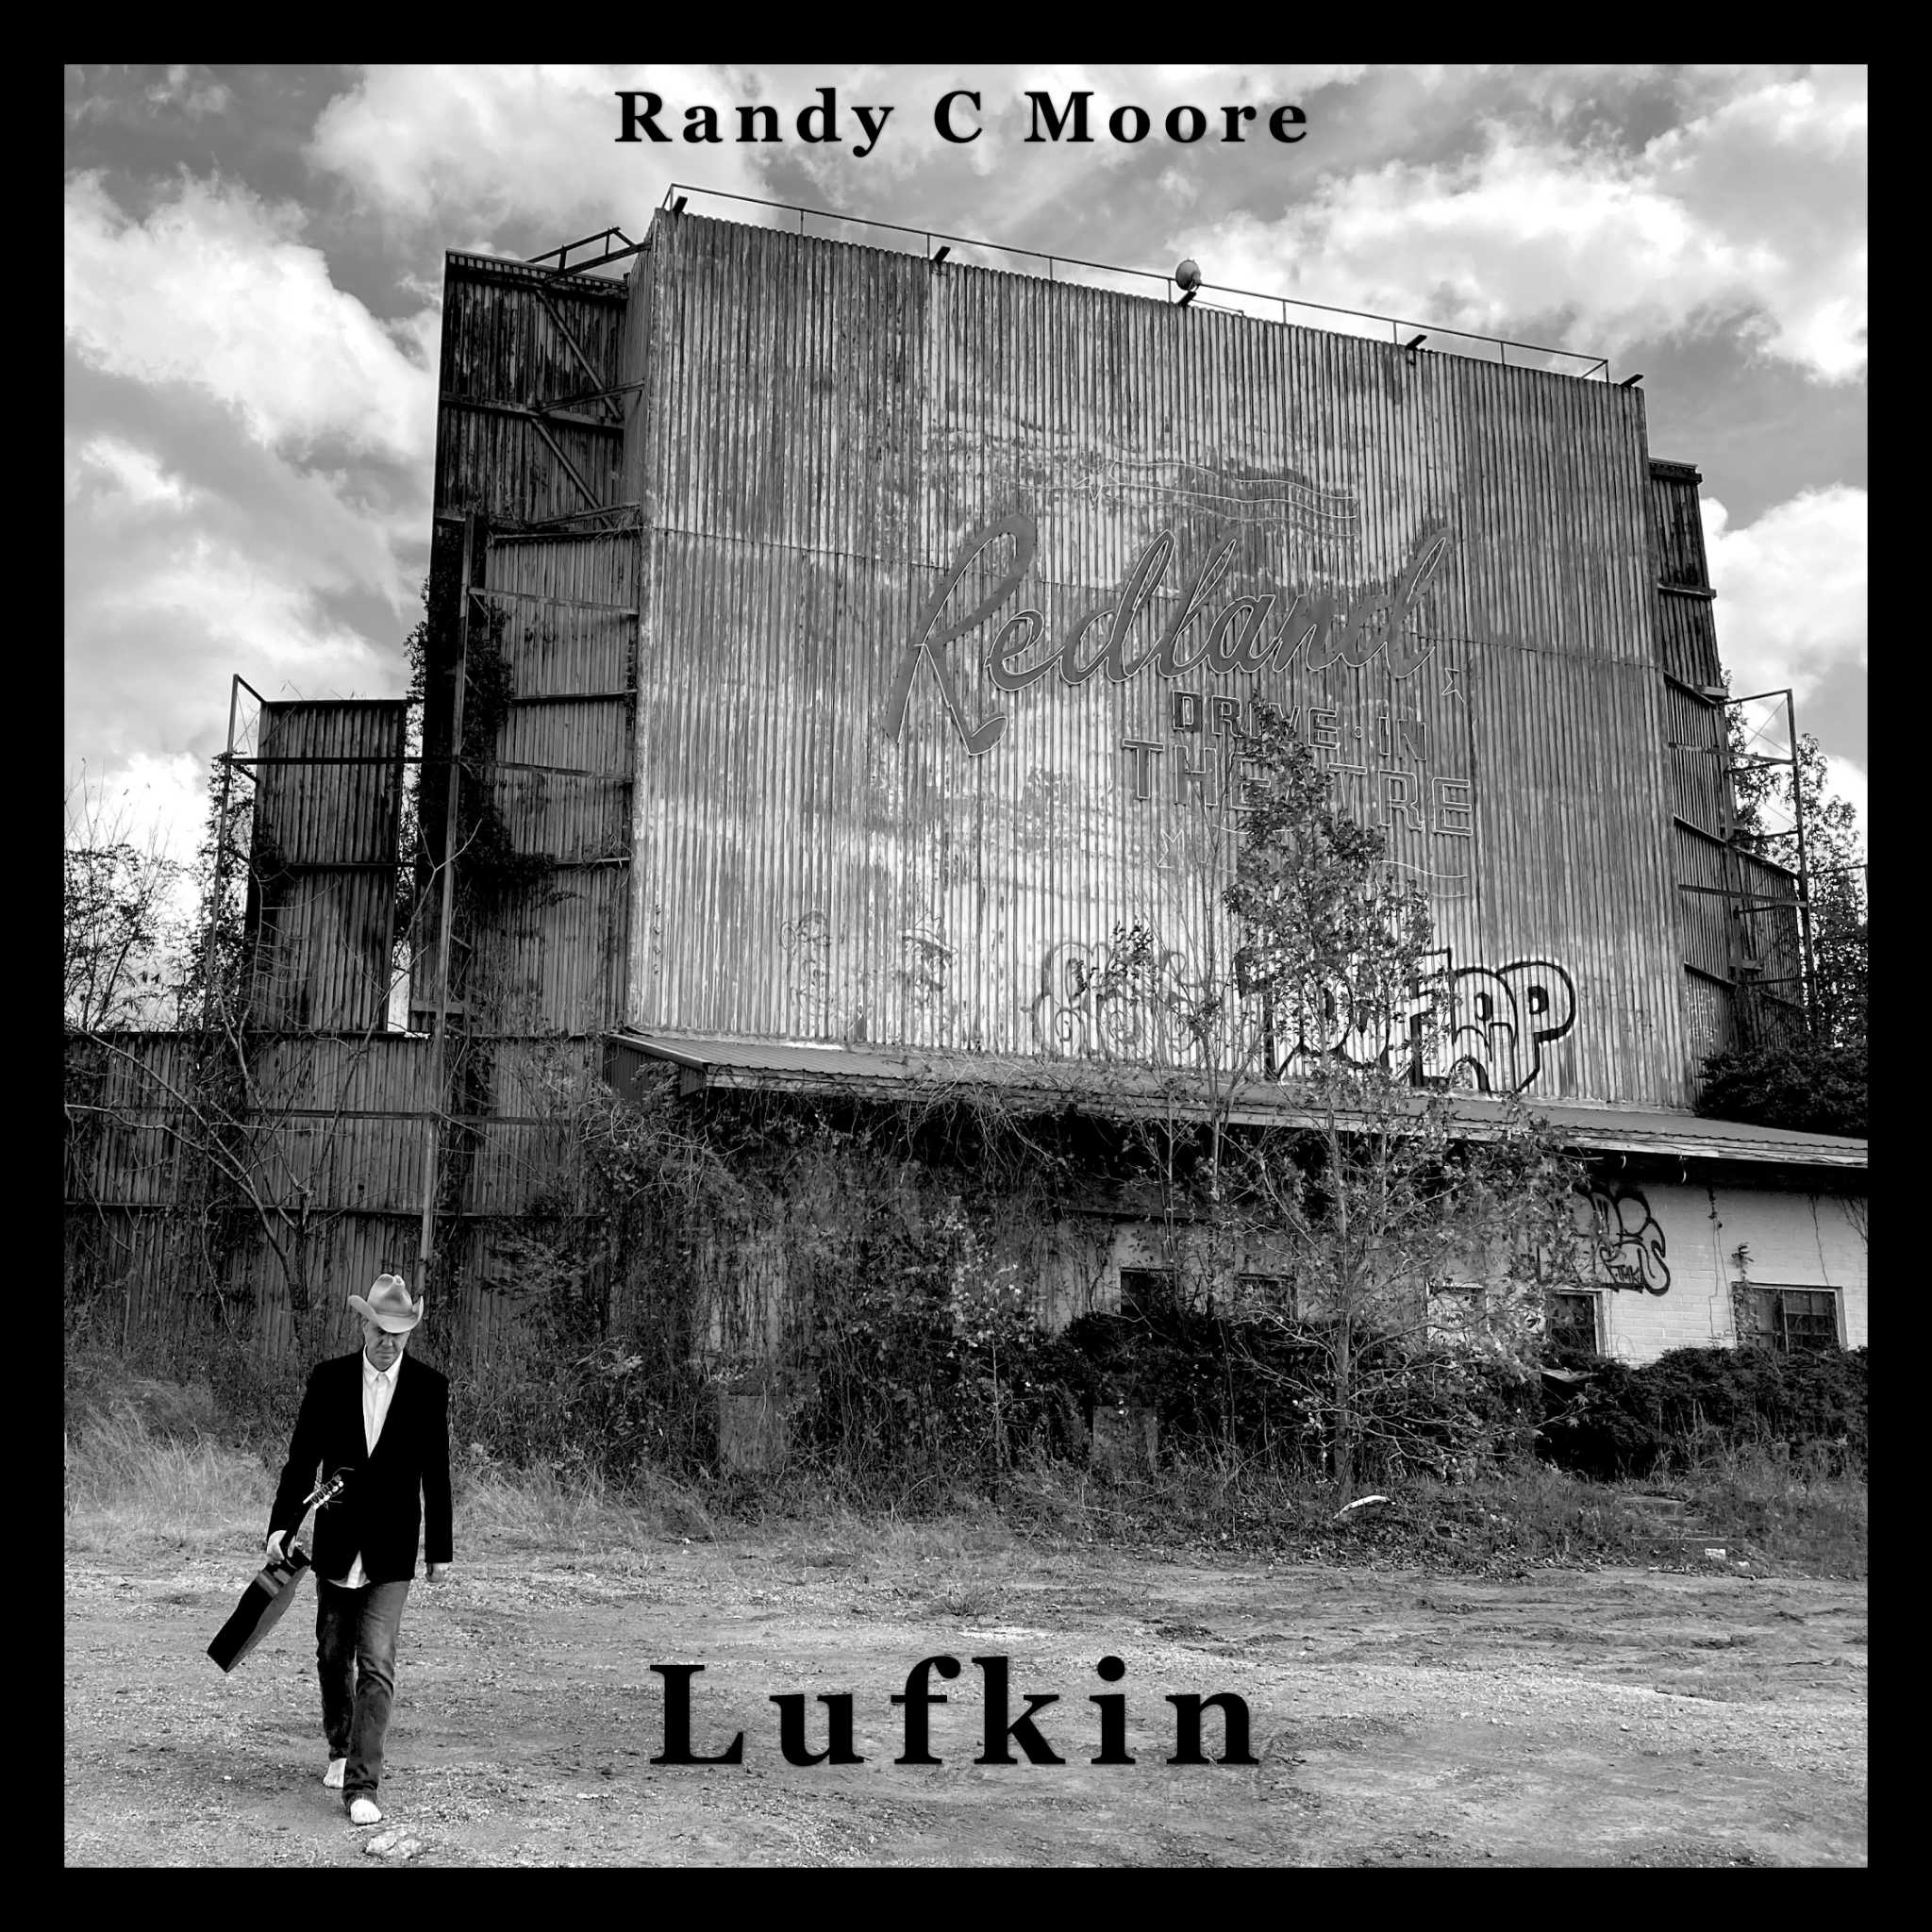 Humble Based Country Musician Randy Moore Returns To Texas Roots With “lufkin”